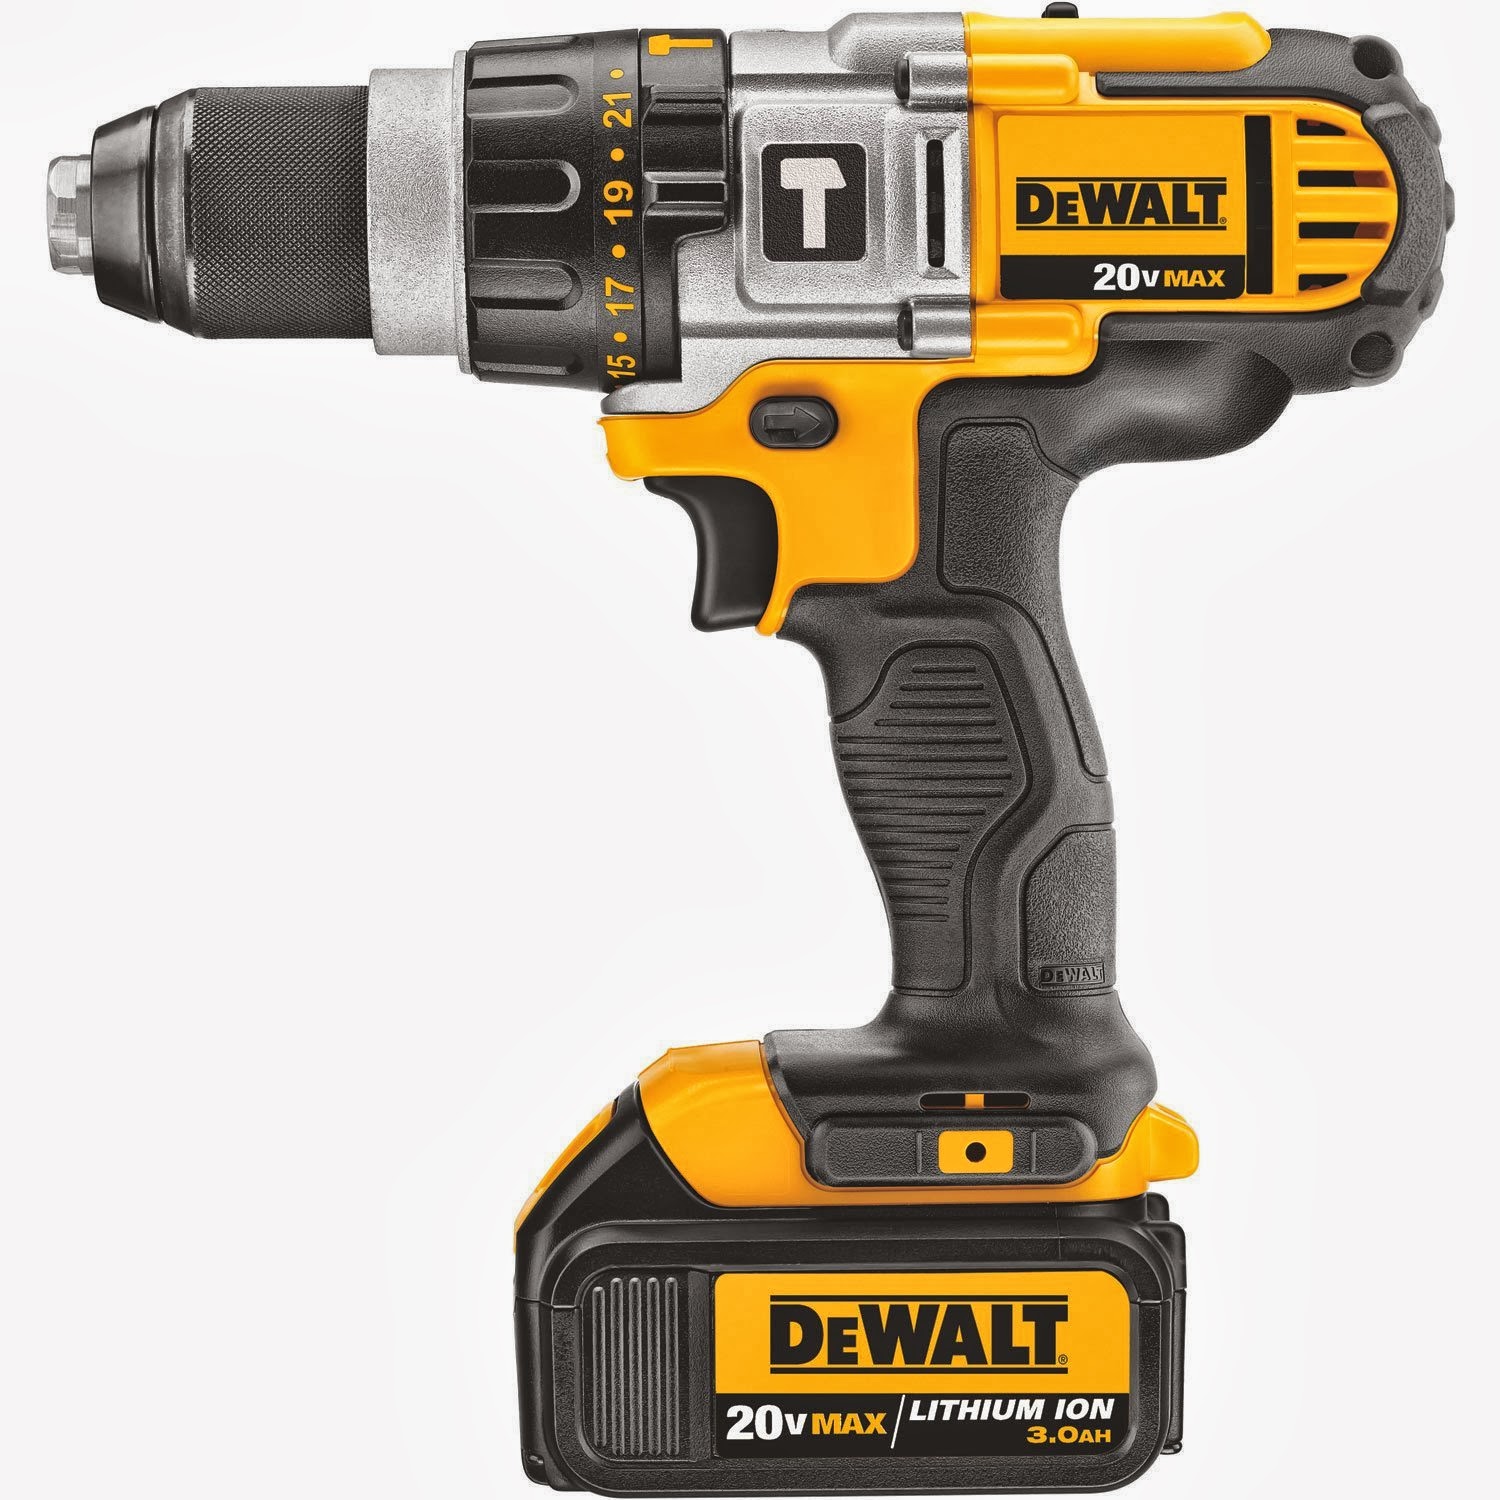 SKL DIY Uptown: Dewalt Impact Cordless Drill now at RM 1,590.00 only!